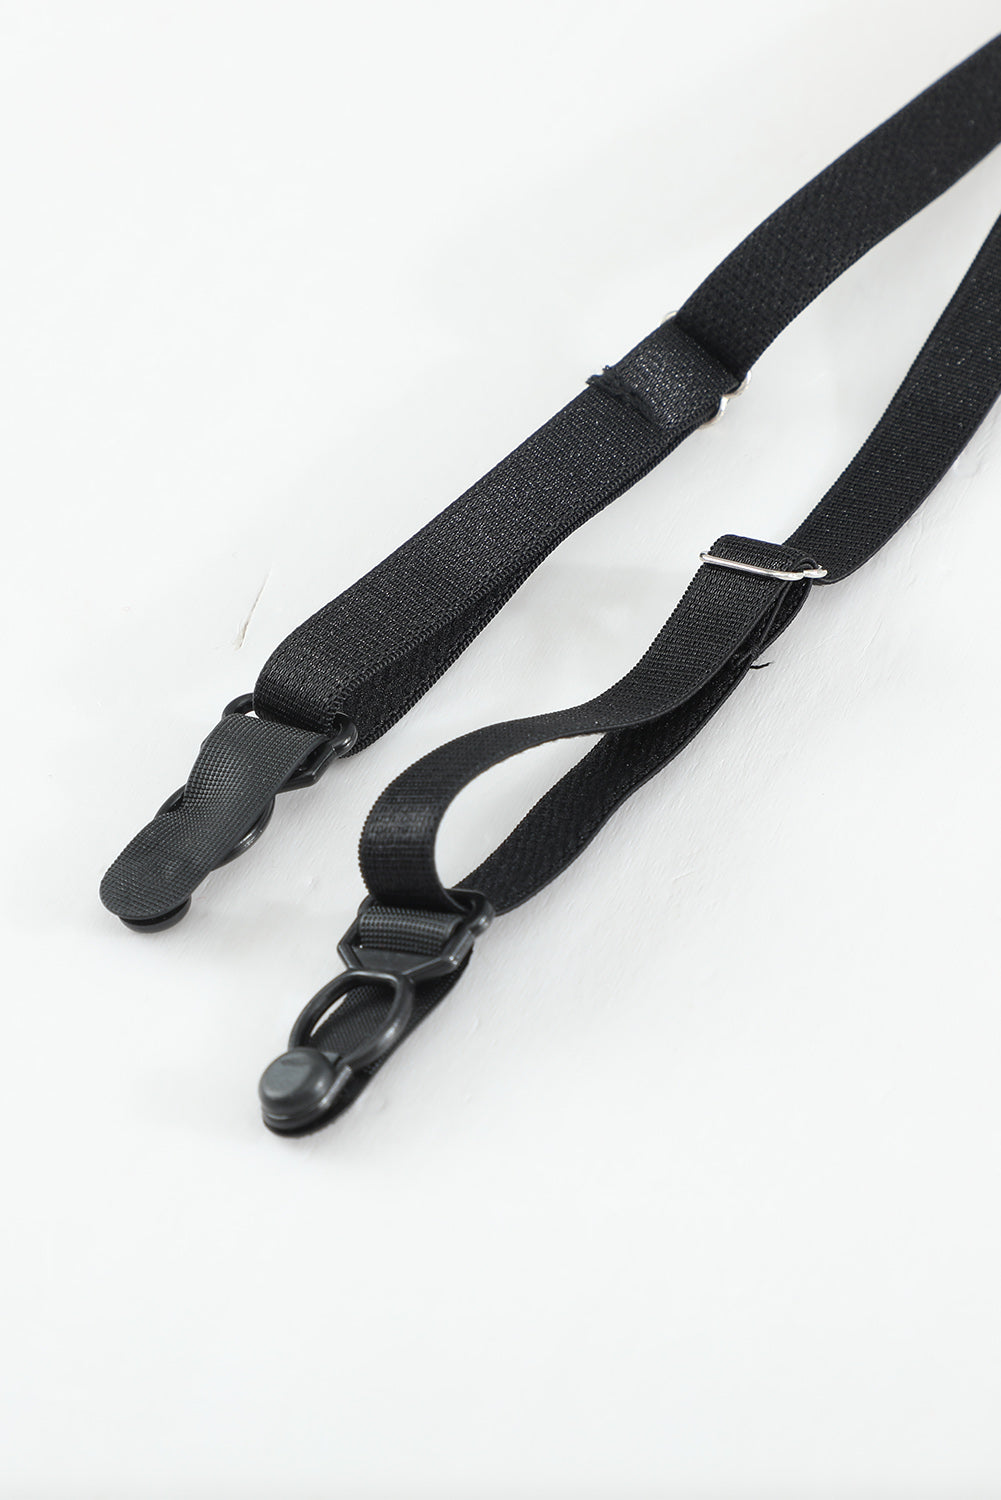 a pair of black straps on a white background